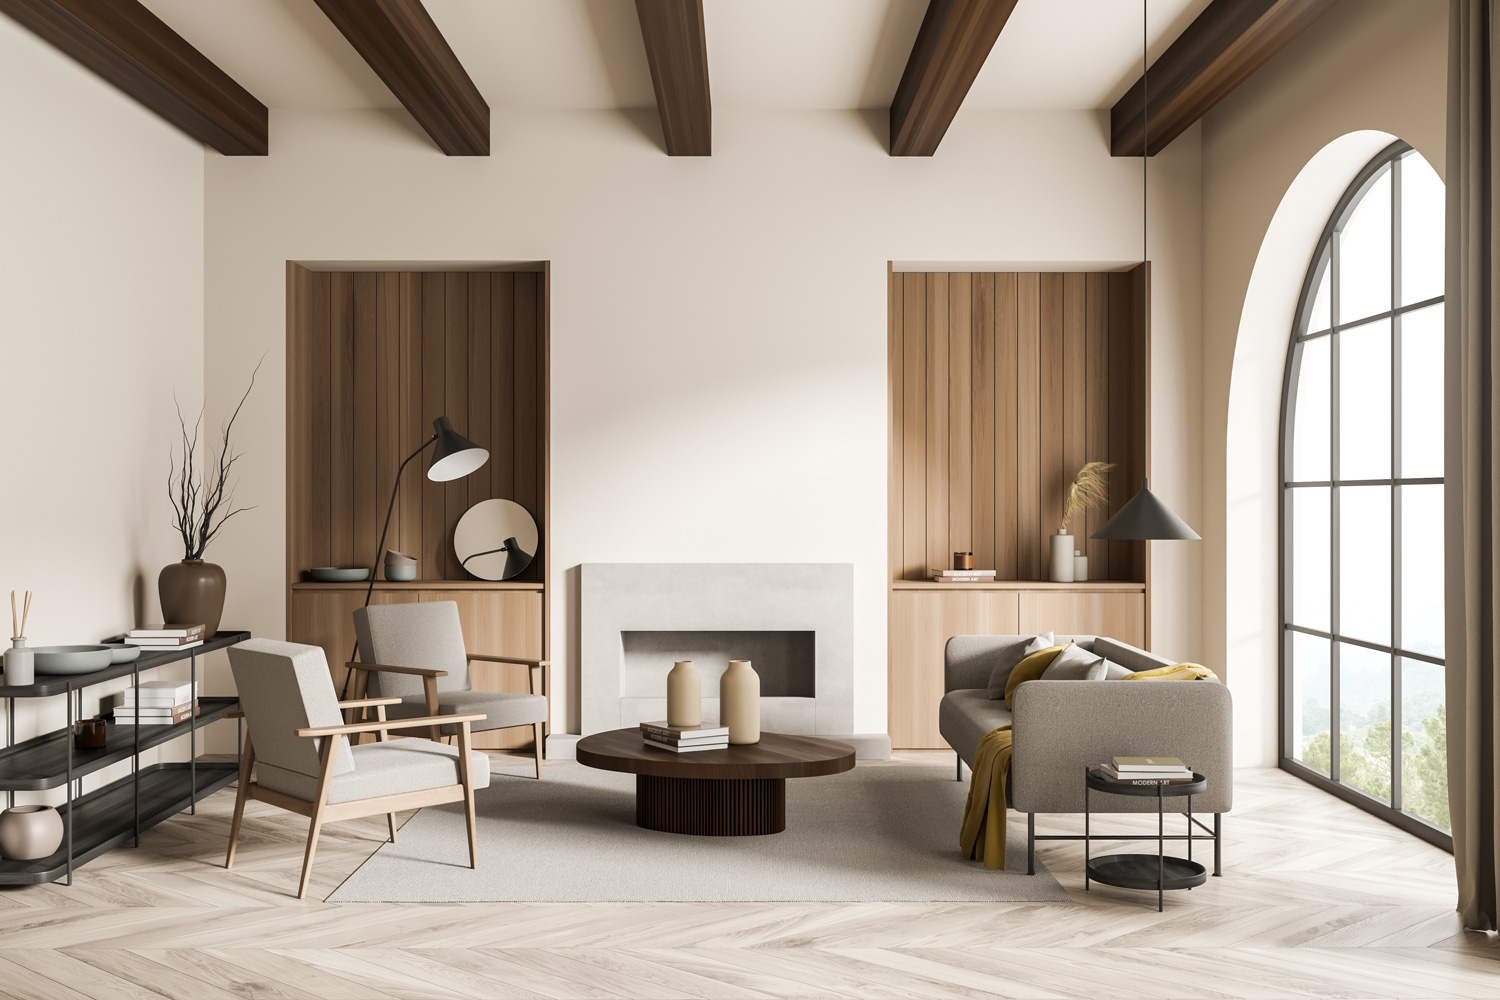 Beige living room with two niche sideboards, wood materials, ceiling beams, arch window, modern fireplace and settee with armchairs. Skandi interior with concept of on trend design.